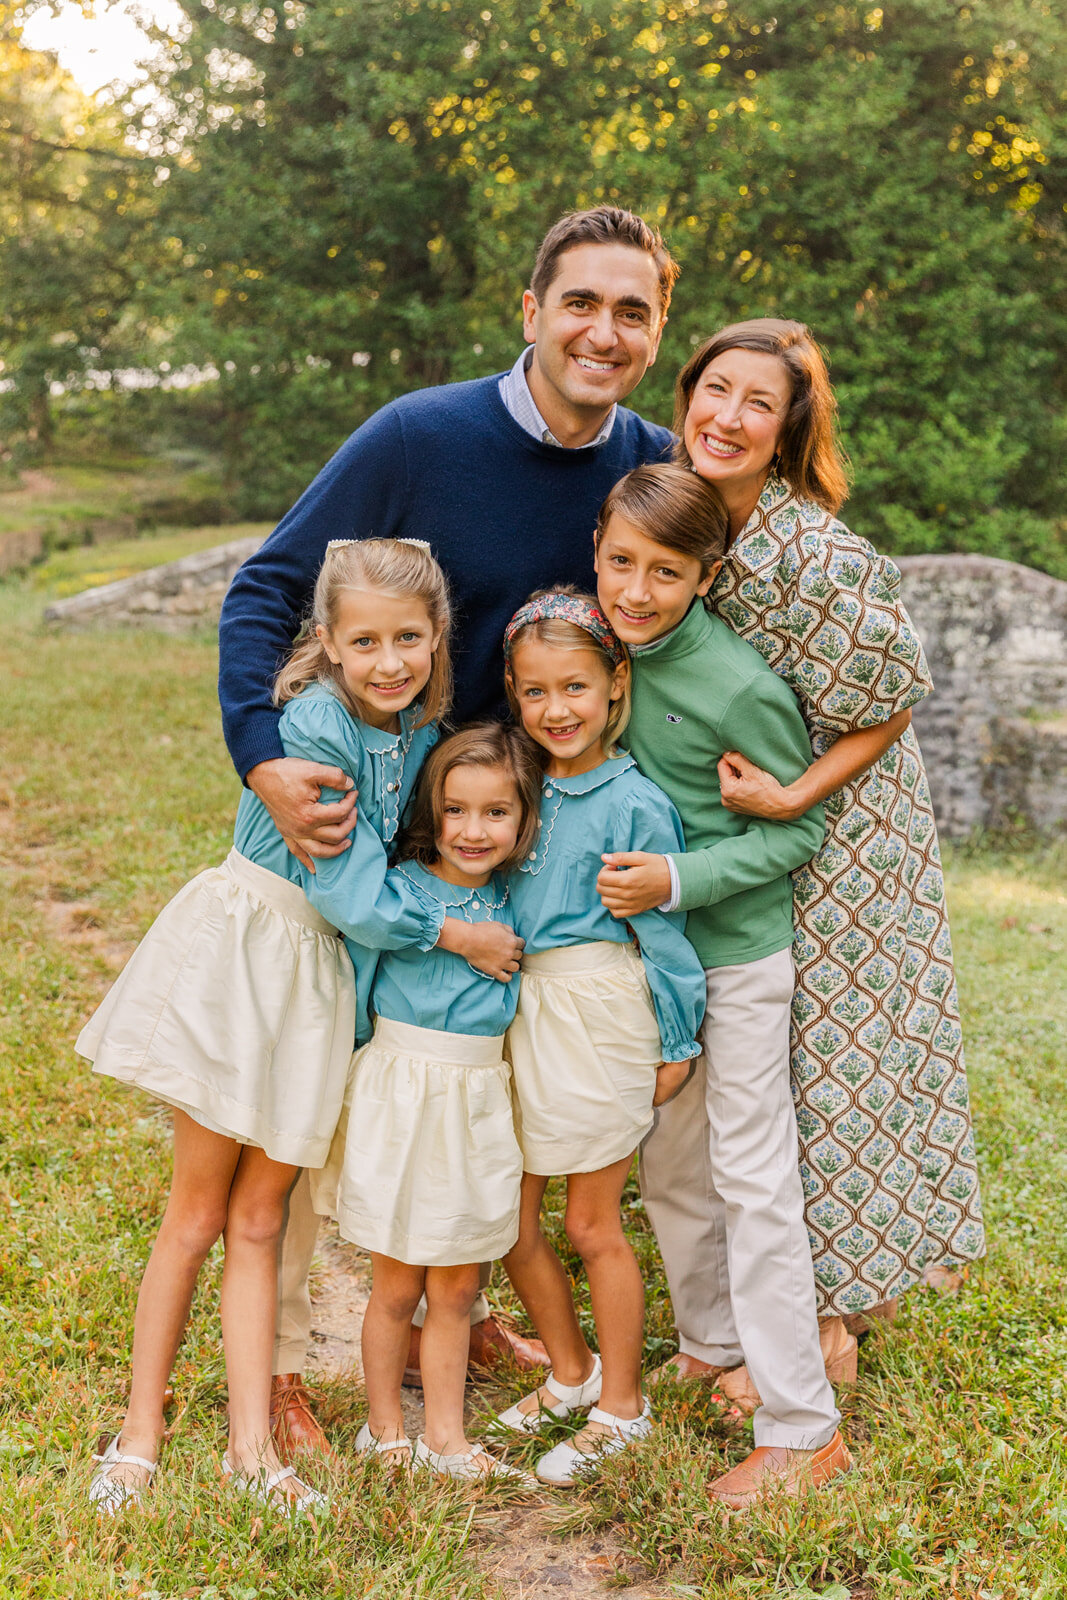 Family hug during photo session in an Atlanta park, 3 sisters wearing matching white skirt and blue top all wearing coordinated blue and green outfits by Laure Photography